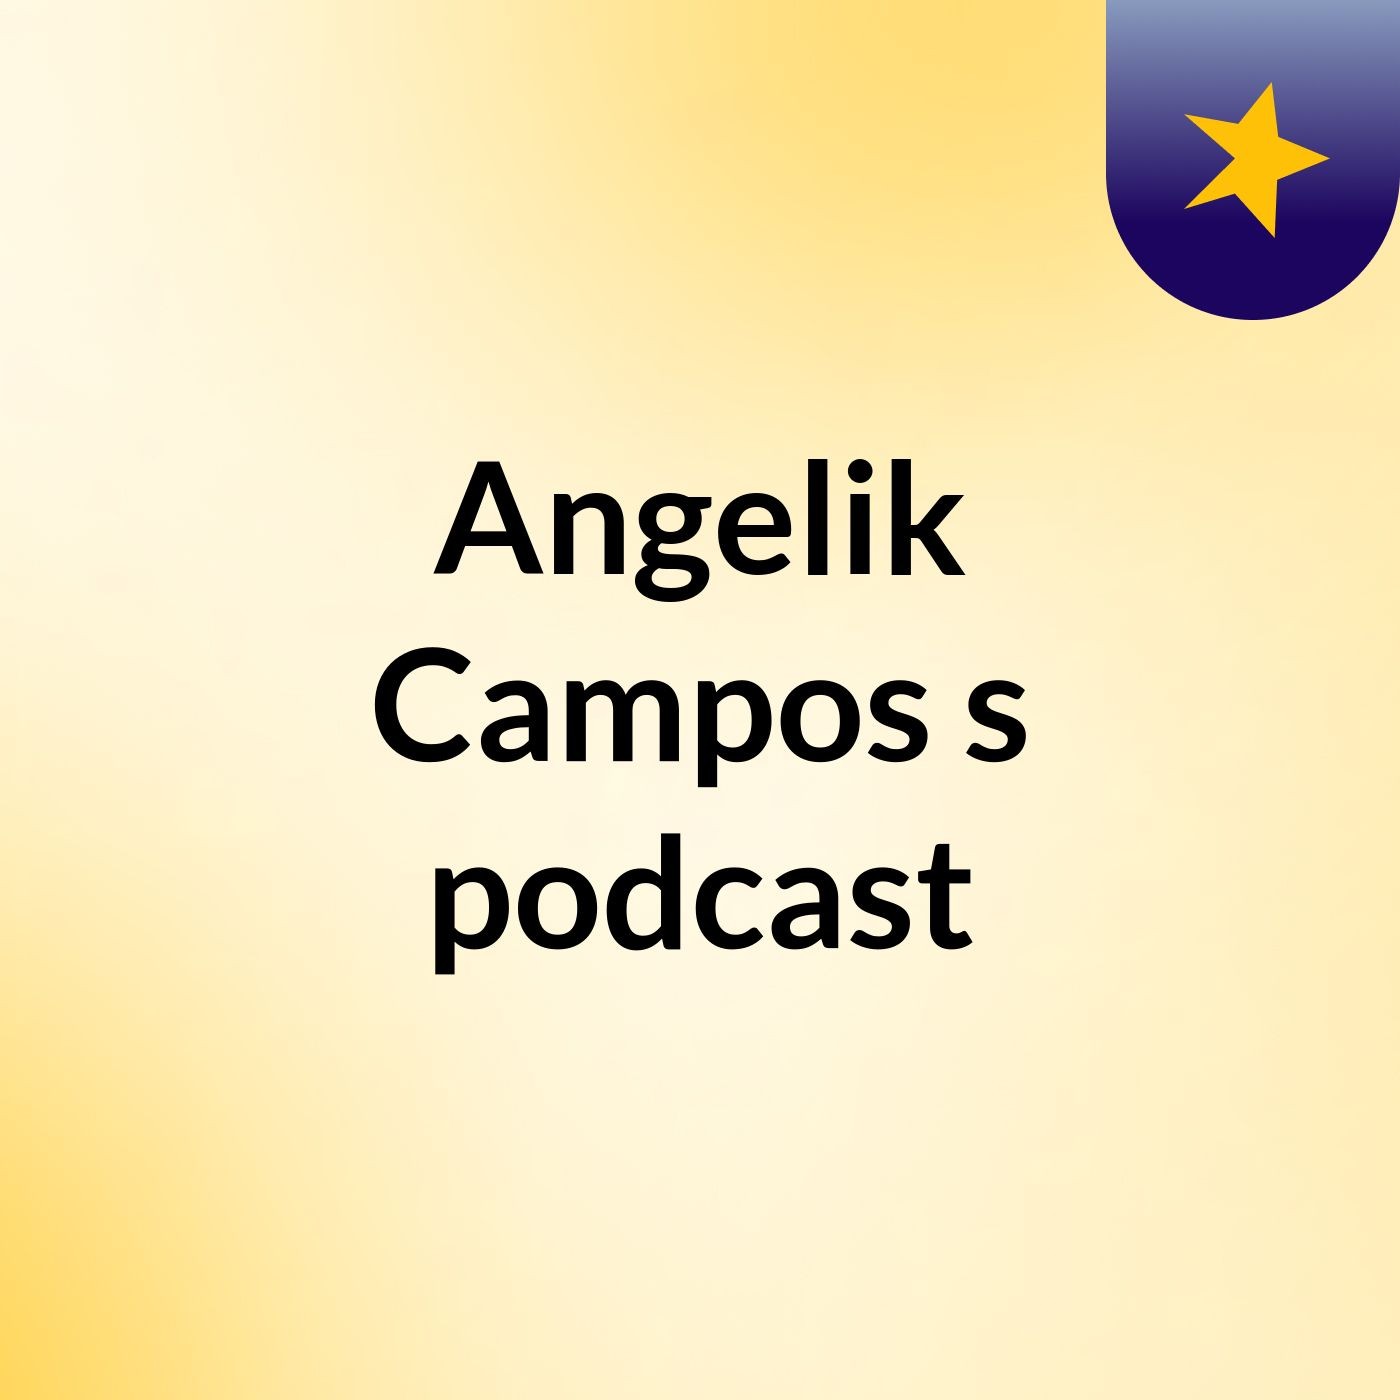 Angelik Campos's podcast